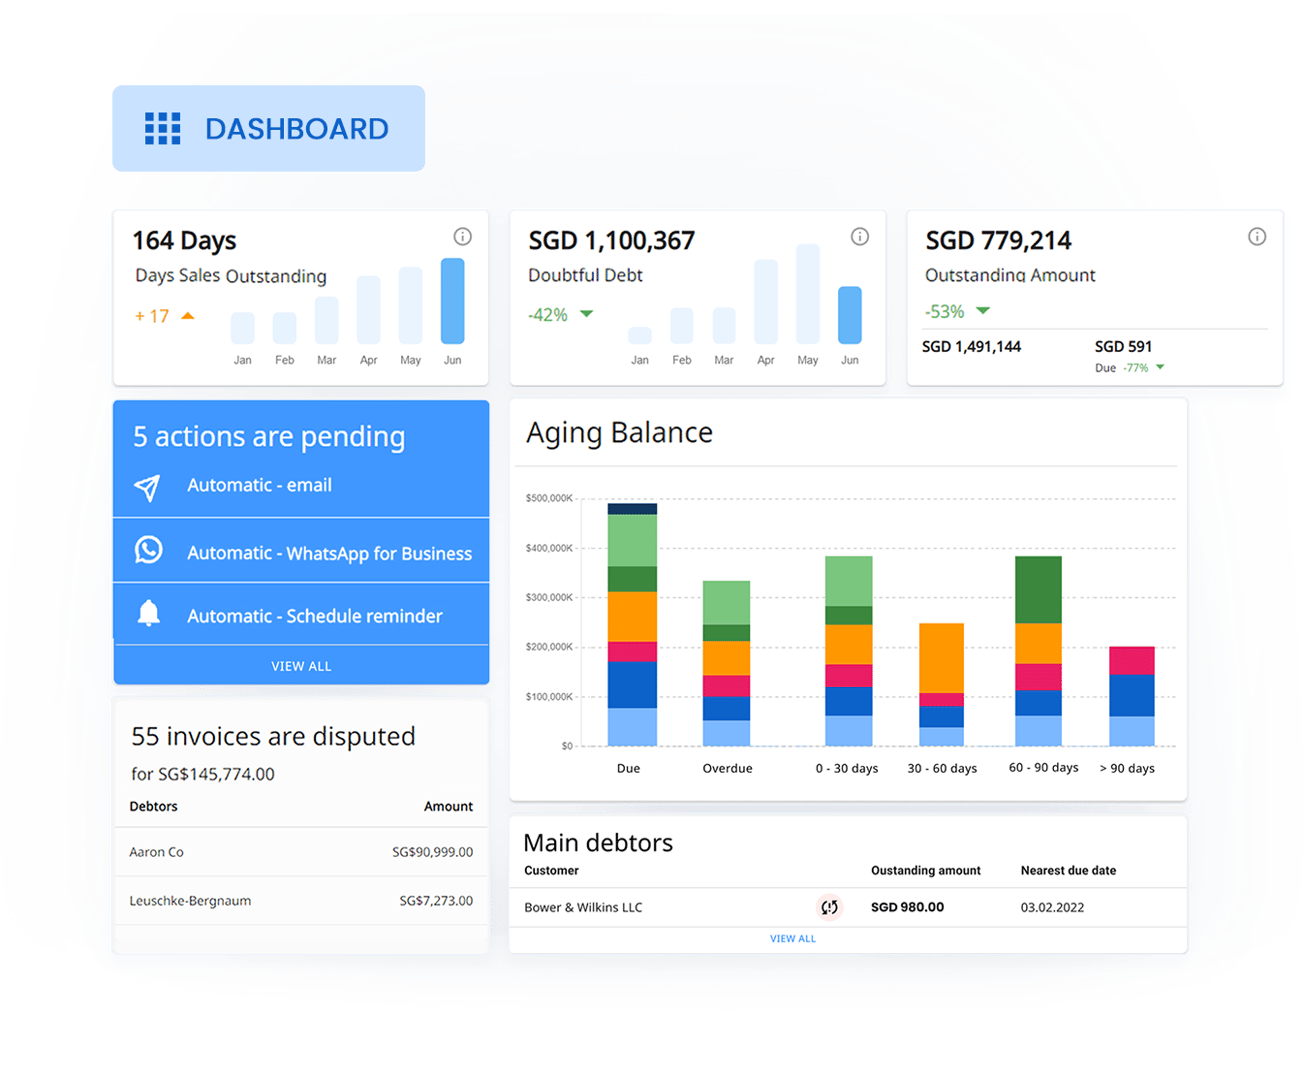 With the receivables dashboard, monitor metrics such as overall days sales outstanding, total overdue amount, doubtful debt and aging balance (AR Aging Report).